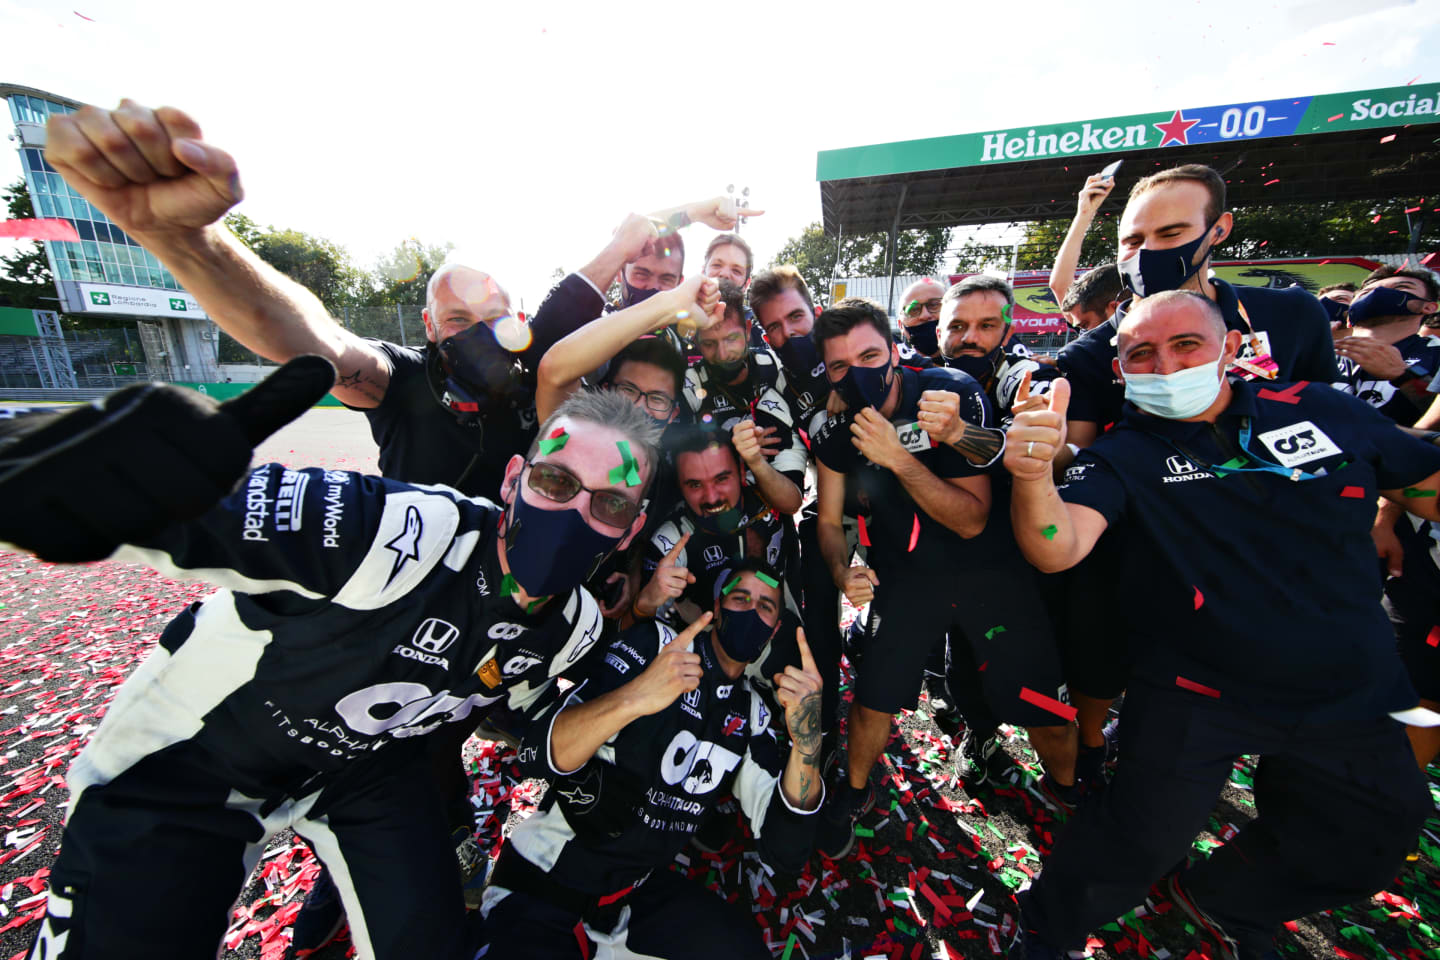 MONZA, ITALY - SEPTEMBER 06: The Scuderia AlphaTauri team celebrate the win of Pierre Gasly of France and Scuderia AlphaTauri during the F1 Grand Prix of Italy at Autodromo di Monza on September 06, 2020 in Monza, Italy. (Photo by Peter Fox/Getty Images)